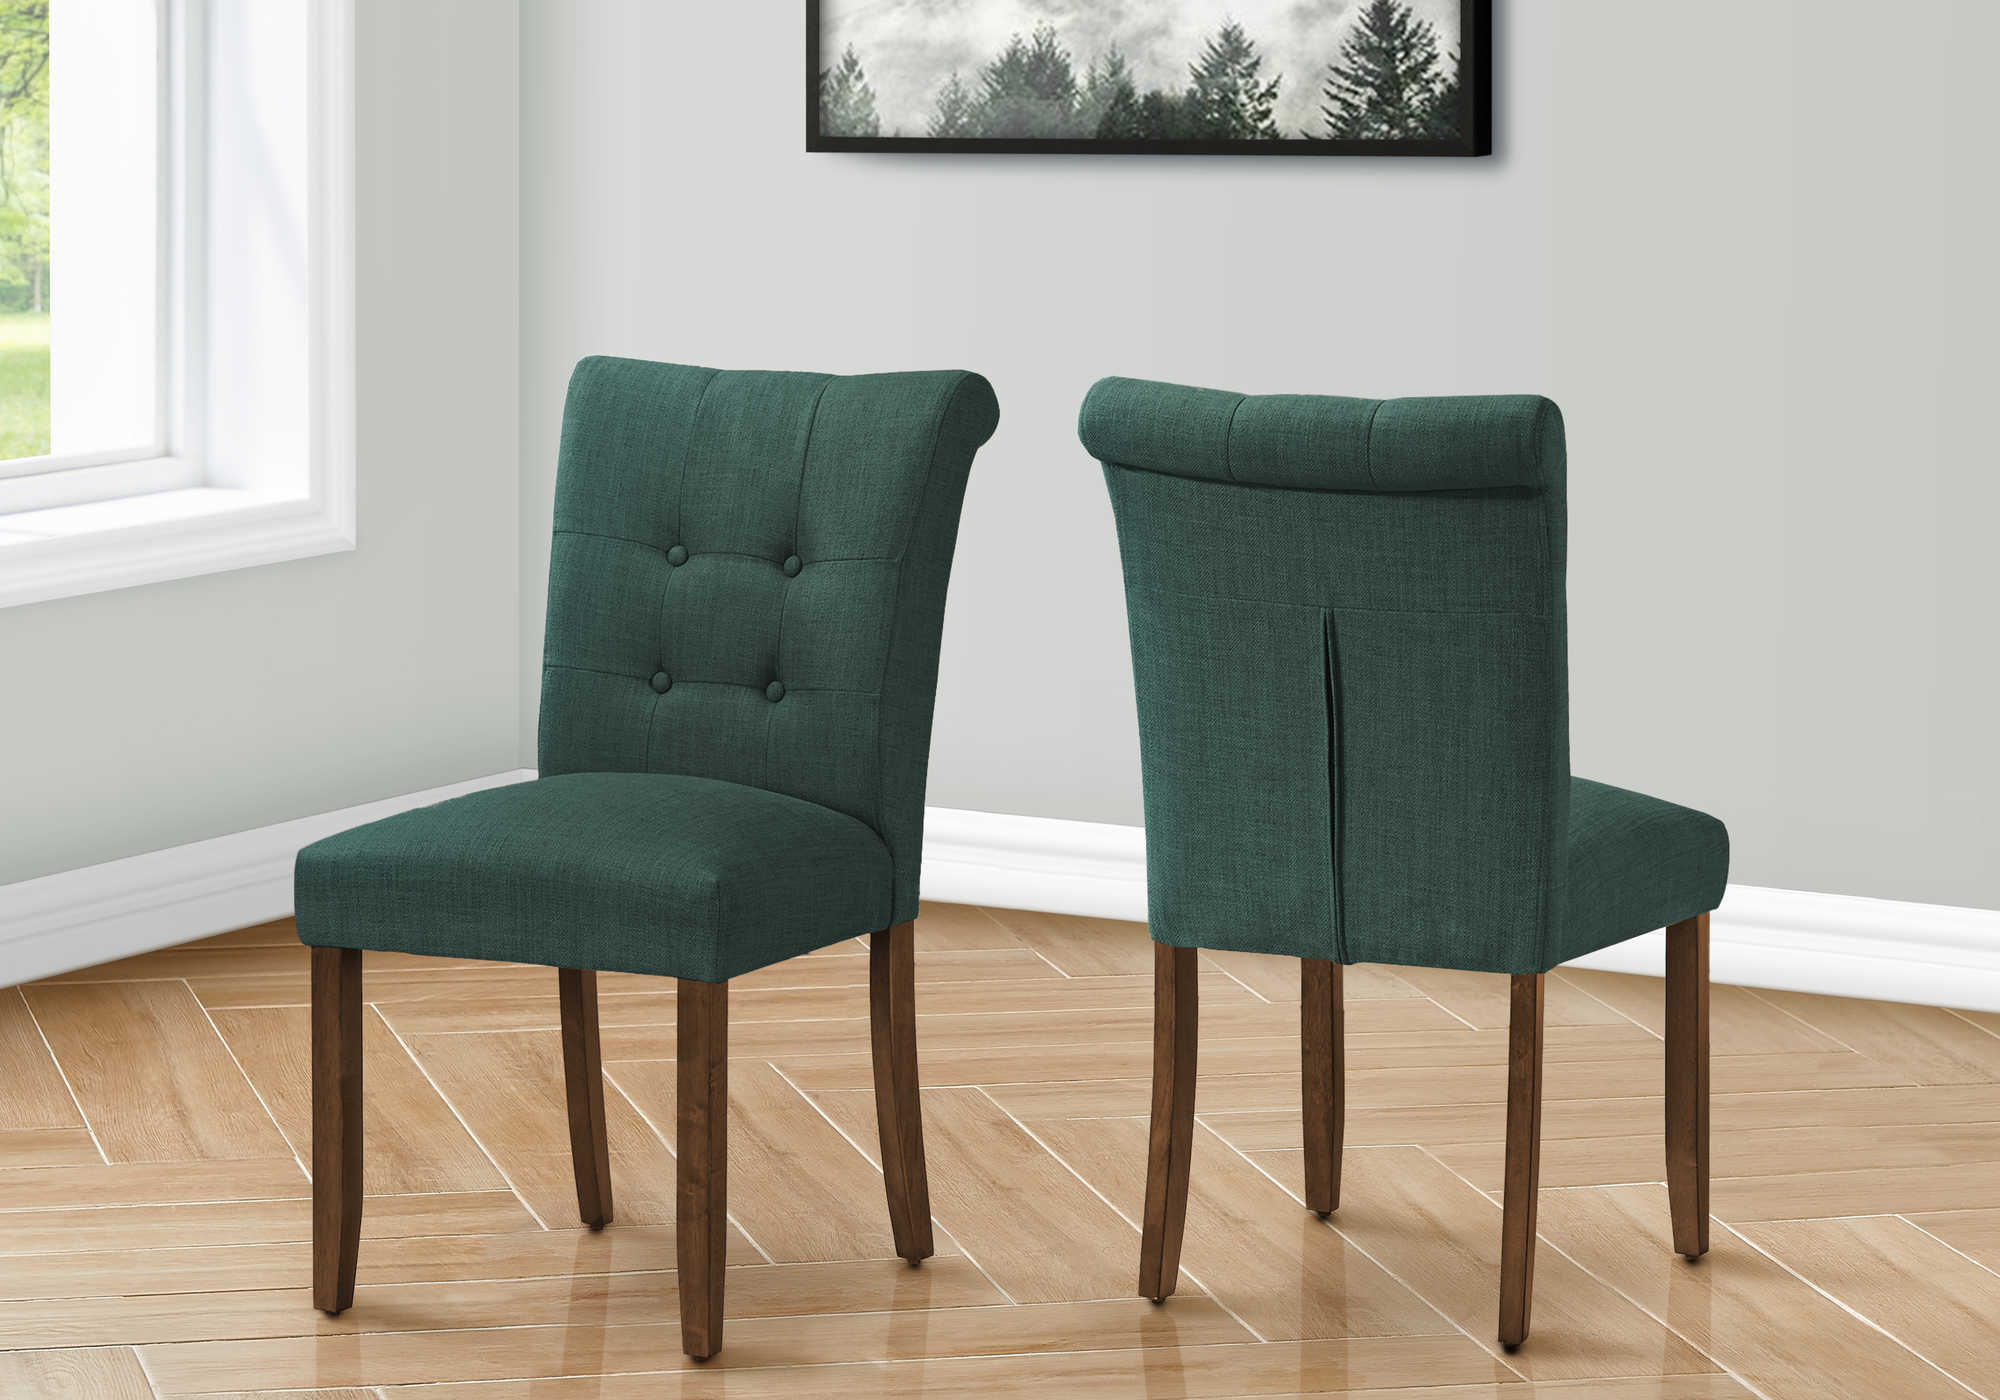 DINING CHAIR - 2PCS / 38"H UPHOLSTERED BLUE FABRIC